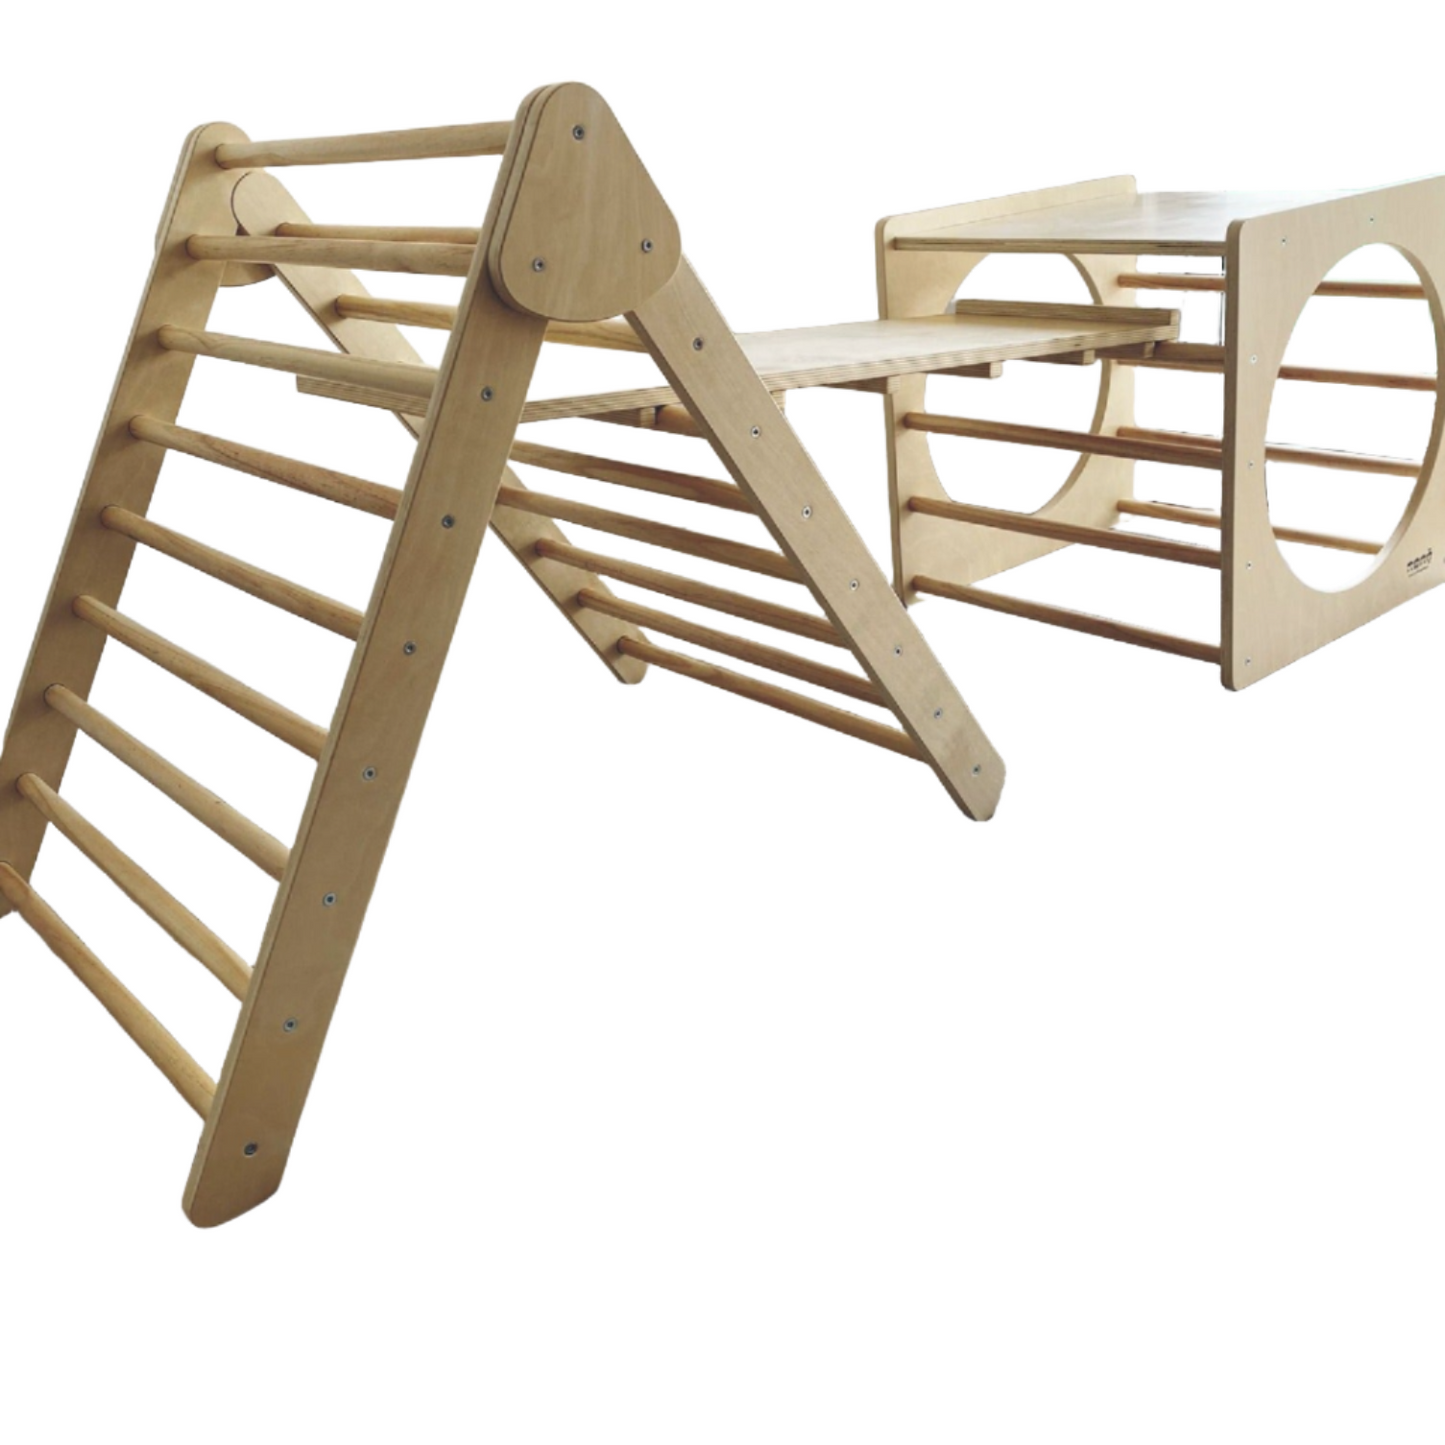 Image of a Pikler Triangle, Cube, and Ramp Bundle Set, showcasing the versatile play structures designed for developmental climbing and creative play for young children on a white background